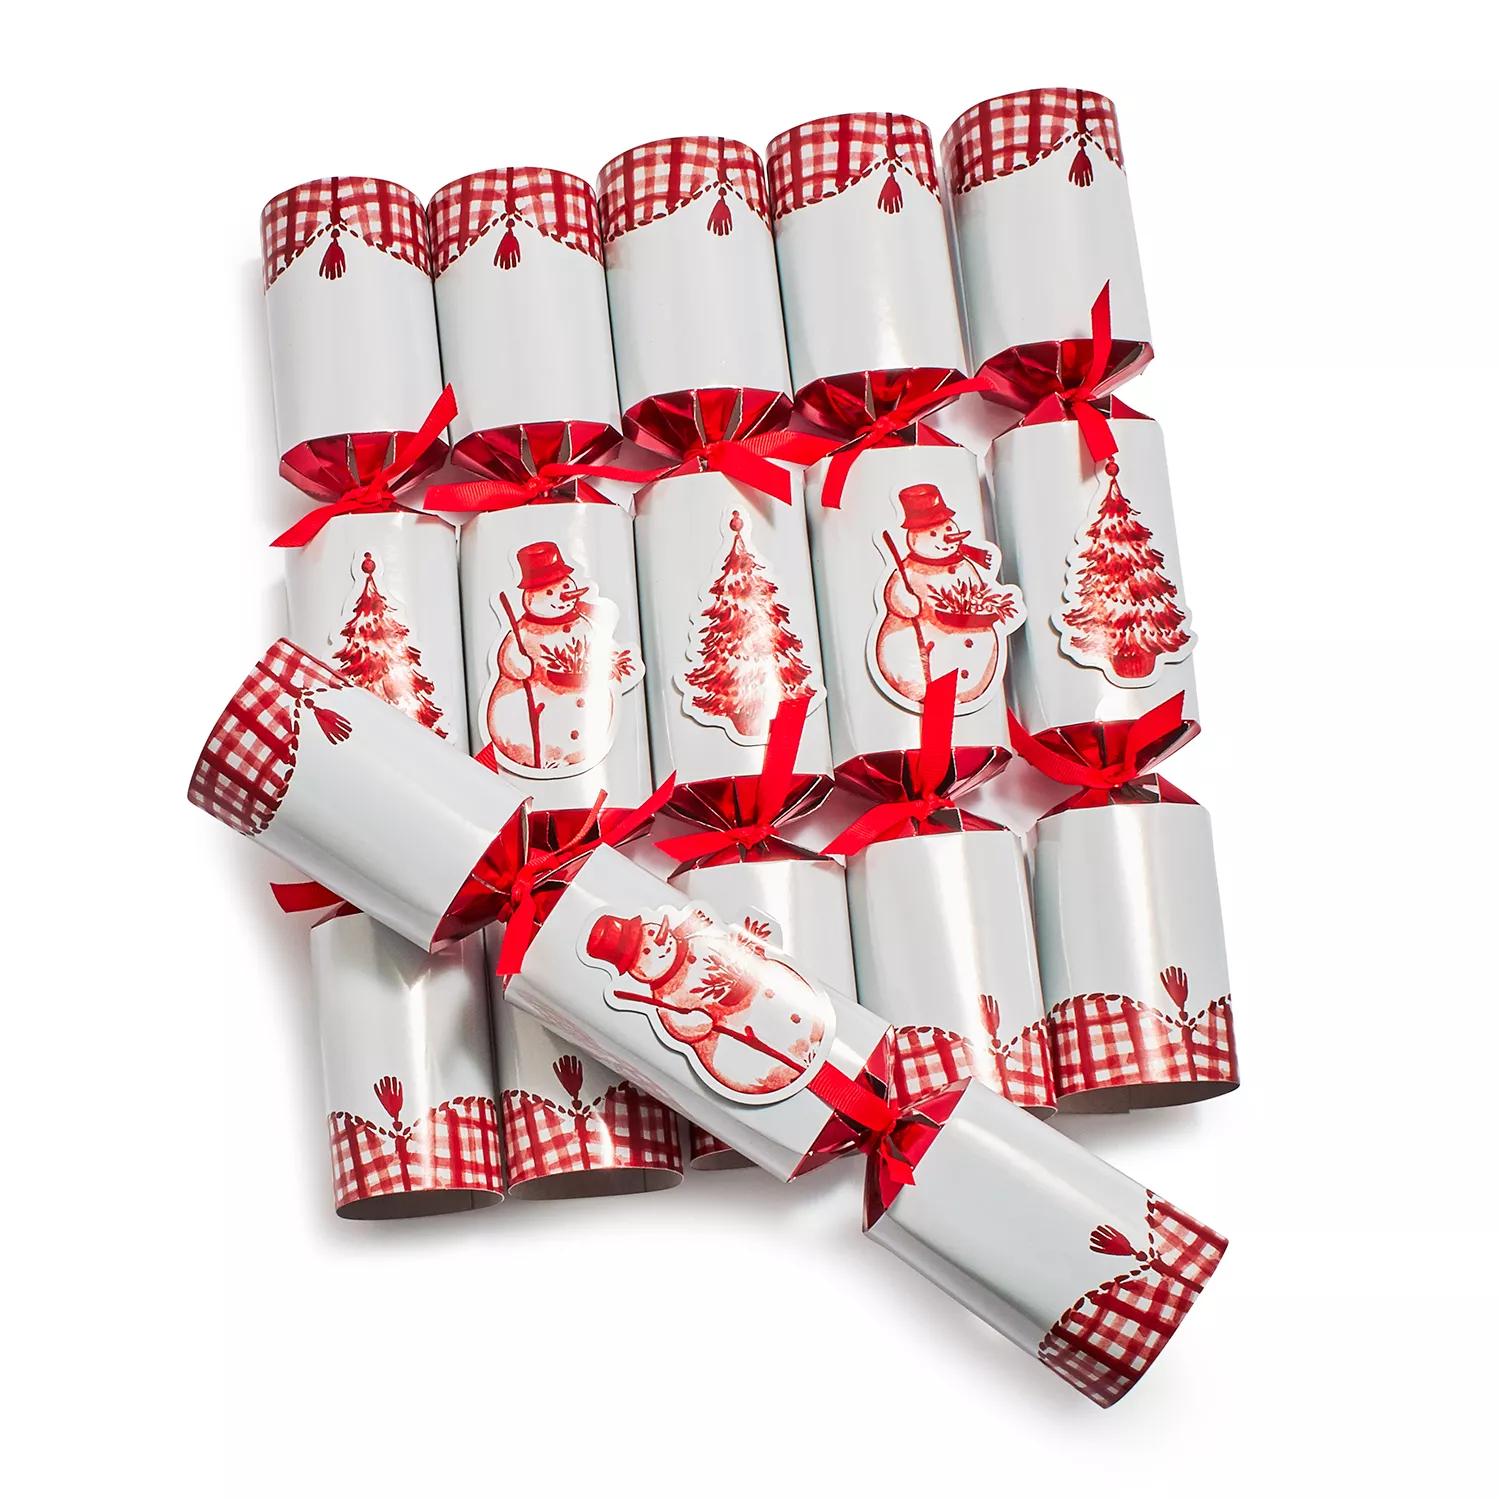 Snowy Lane Party Crackers, Set of 6